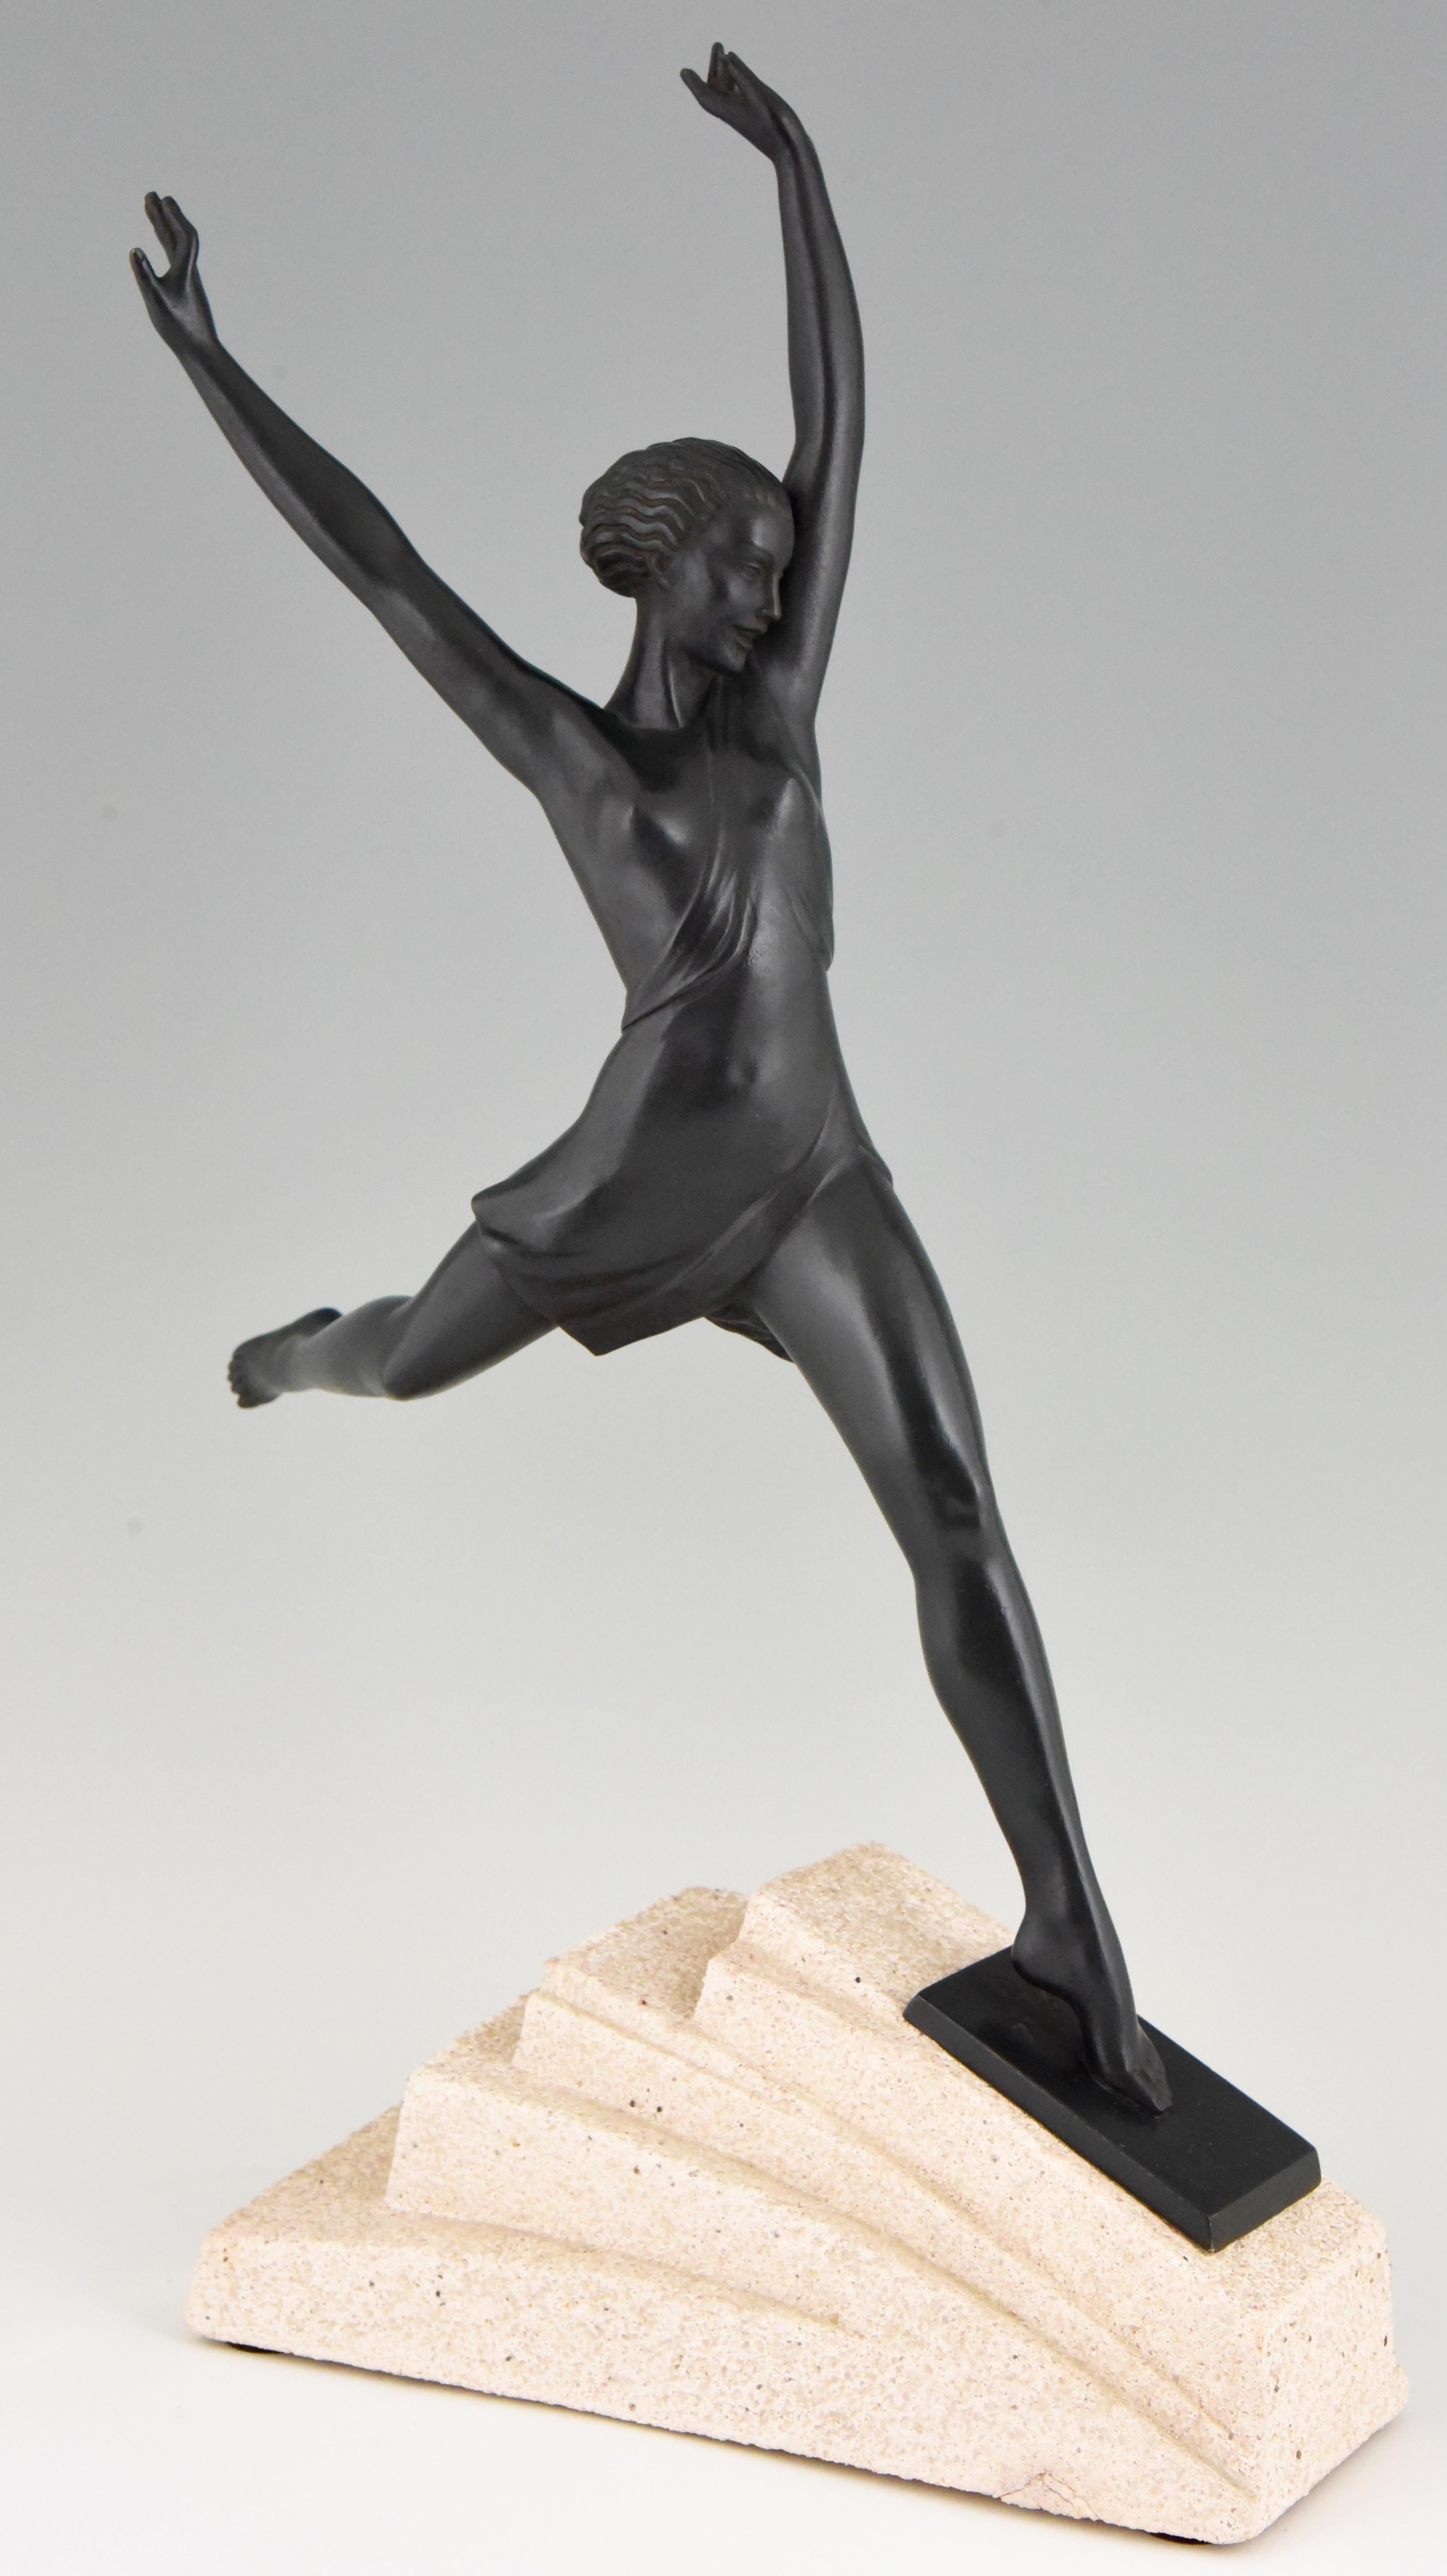 Olypme, elegant Art Deco sculpture of a running girl by Fayral, pseudonym of Pierre le Faguays cast by the Max le Verrier foundry. Green patinated art metal on a stone base, France, 1930.
Weight 6.5 kg.